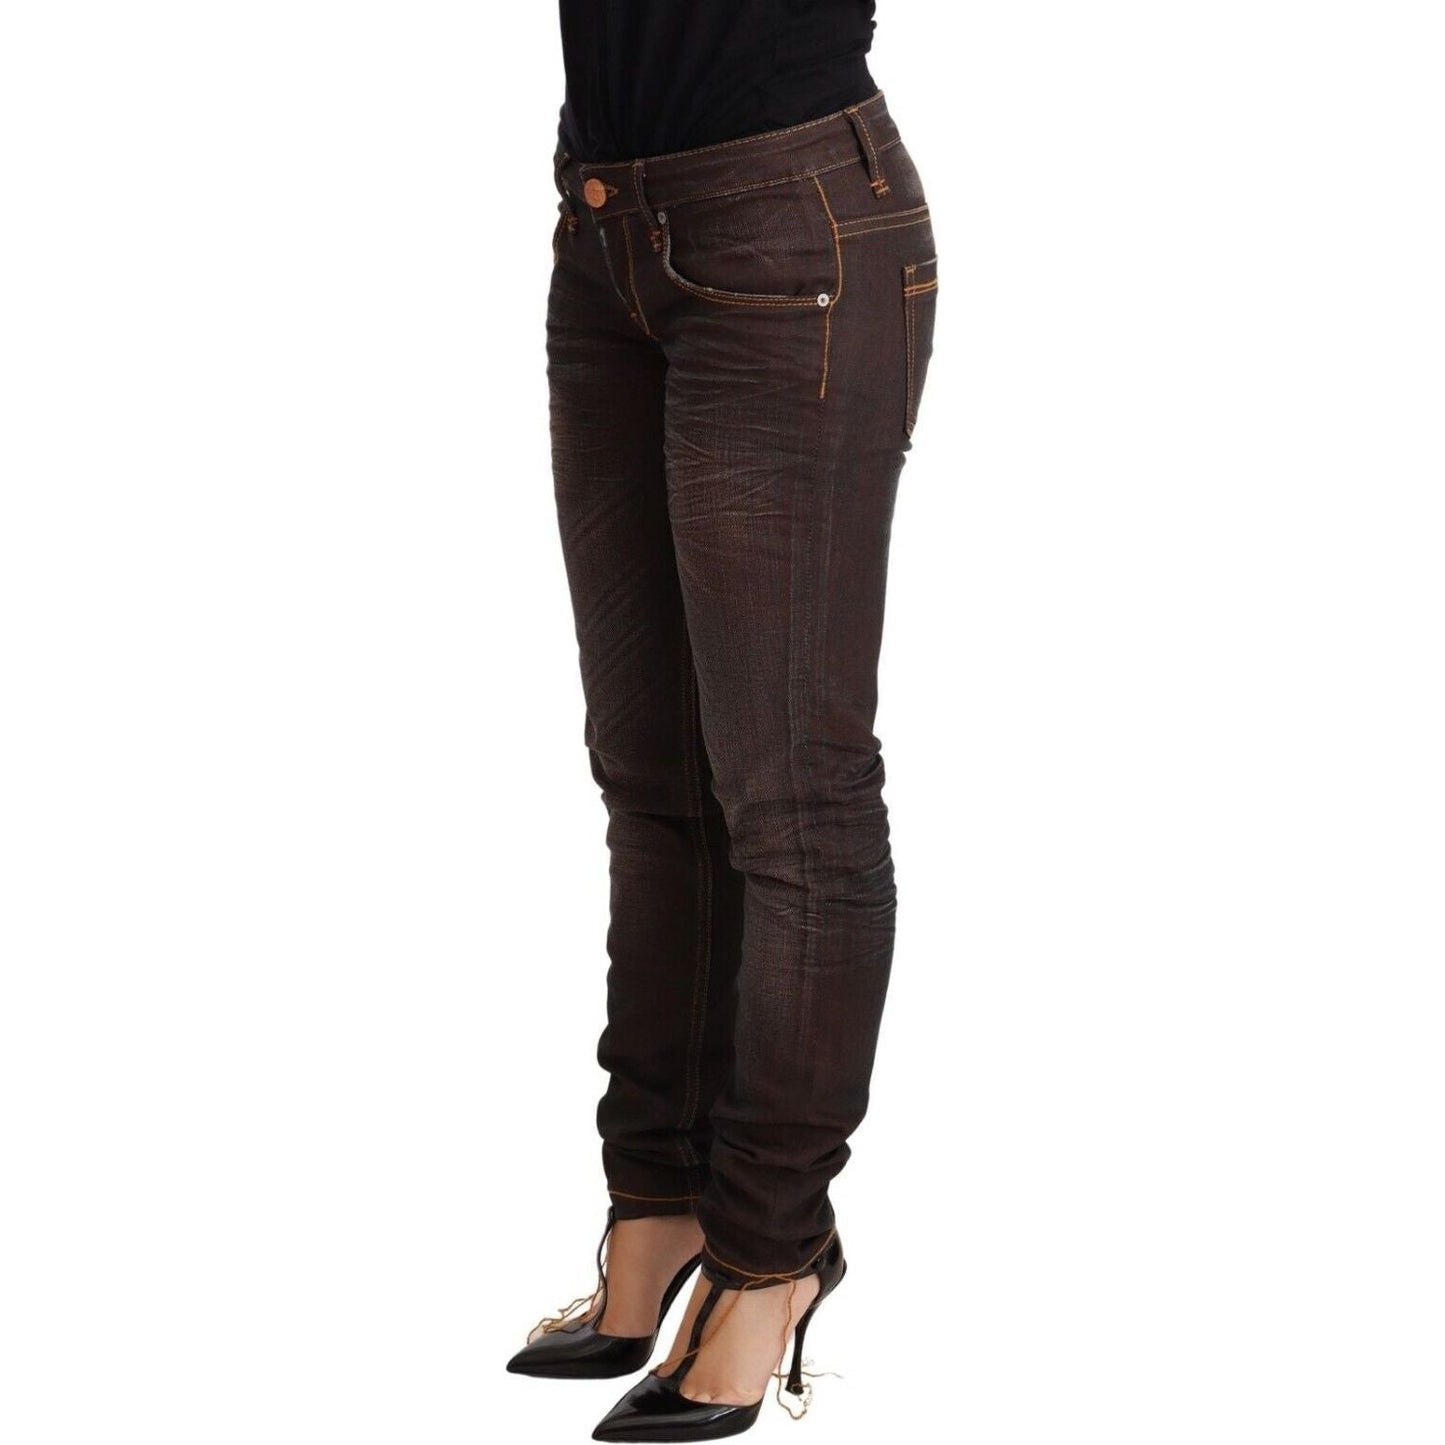 Acht Chic Low Waist Skinny Brown Jeans Jeans & Pants brown-washed-cotton-slim-fit-denim-low-waist-trouser-jeans s-l1600-151-97bb2175-bc3.jpg